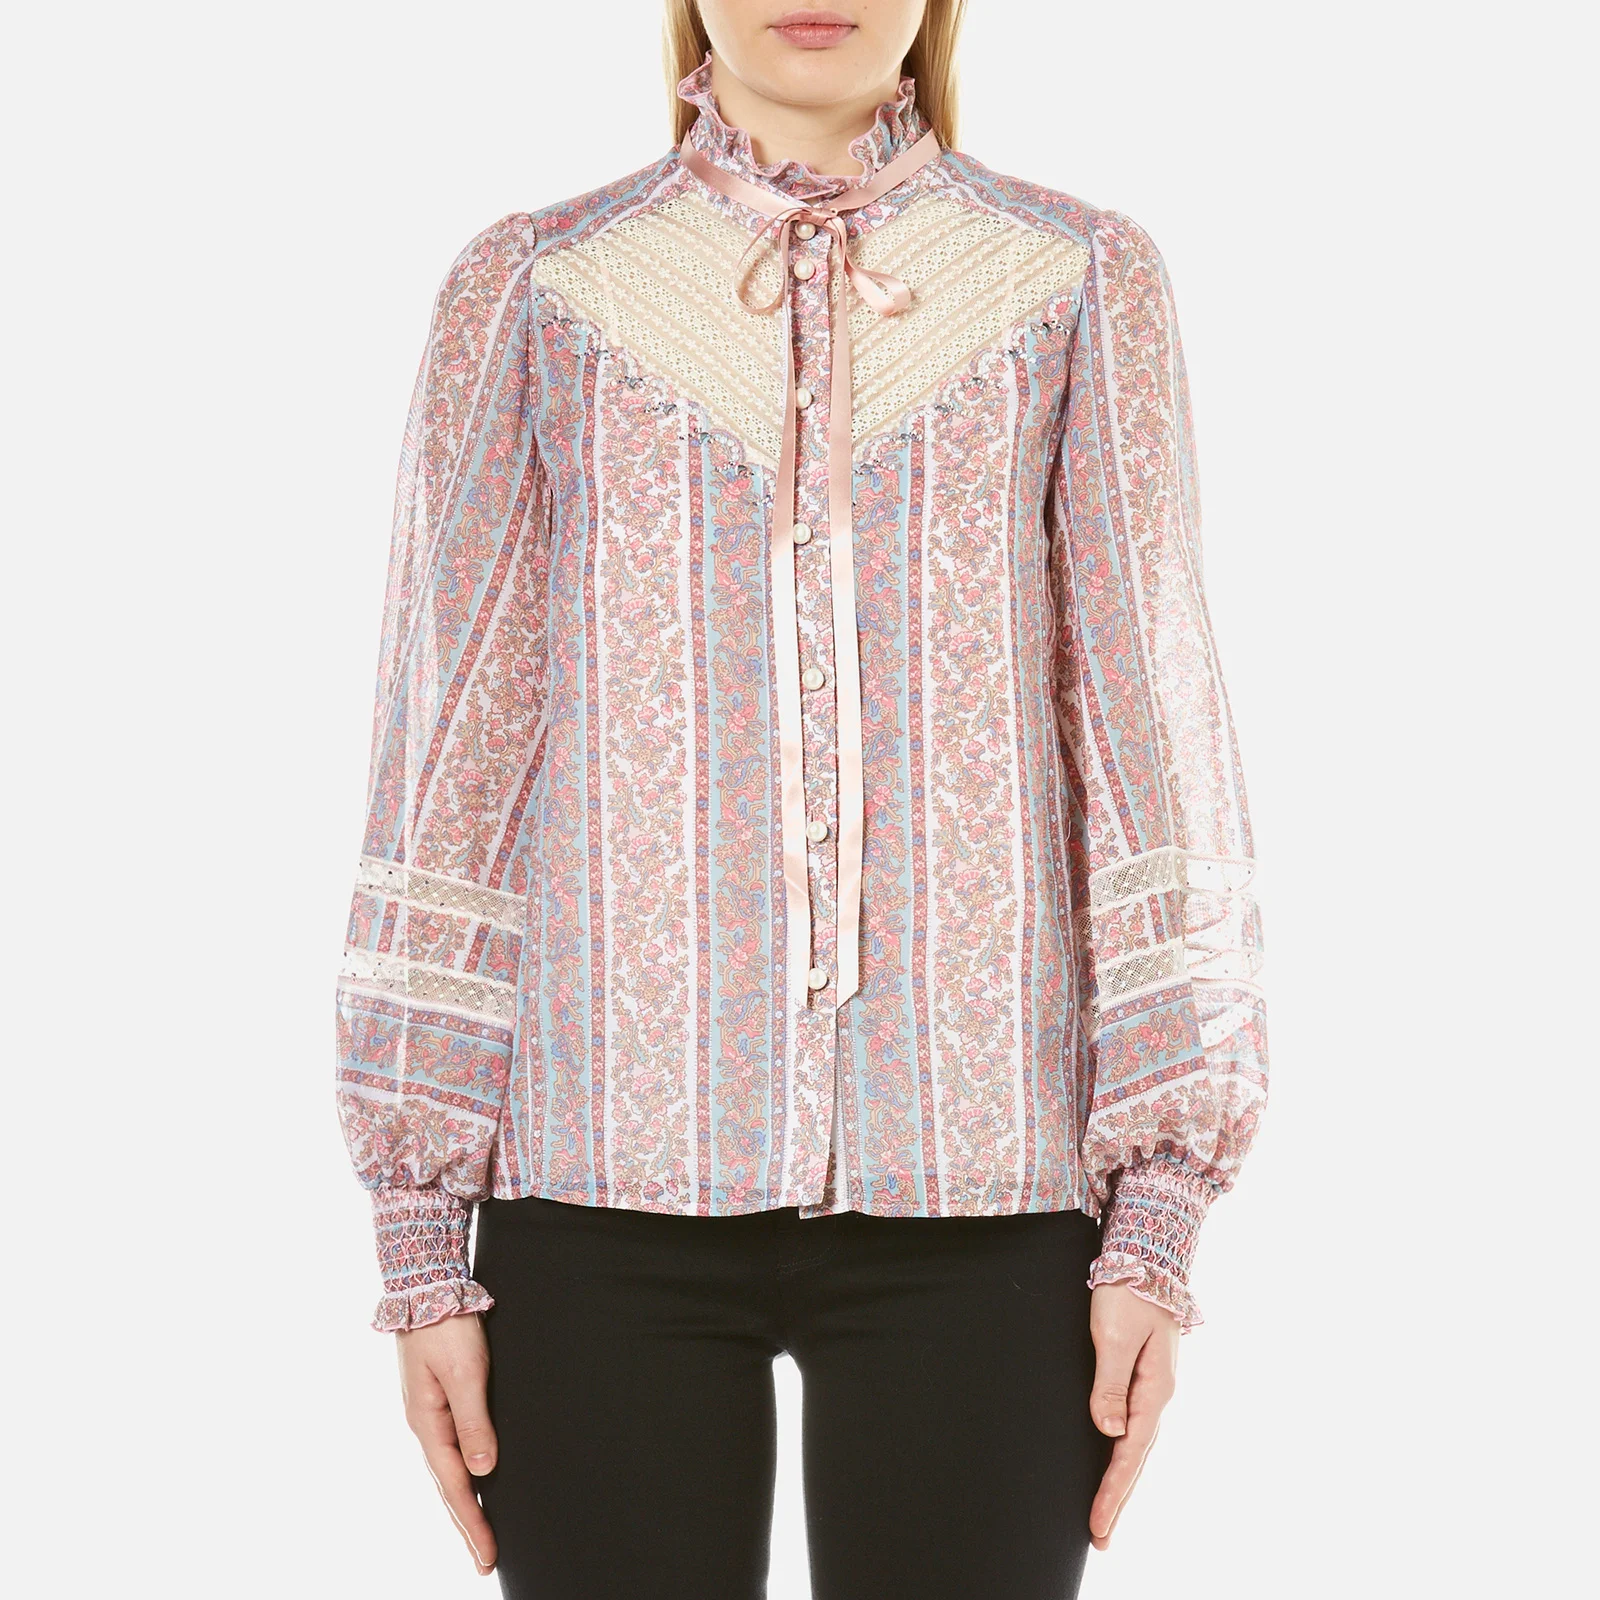 Marc Jacobs Women's Semi Embellished Button Down Blouse - White/Multi Image 1